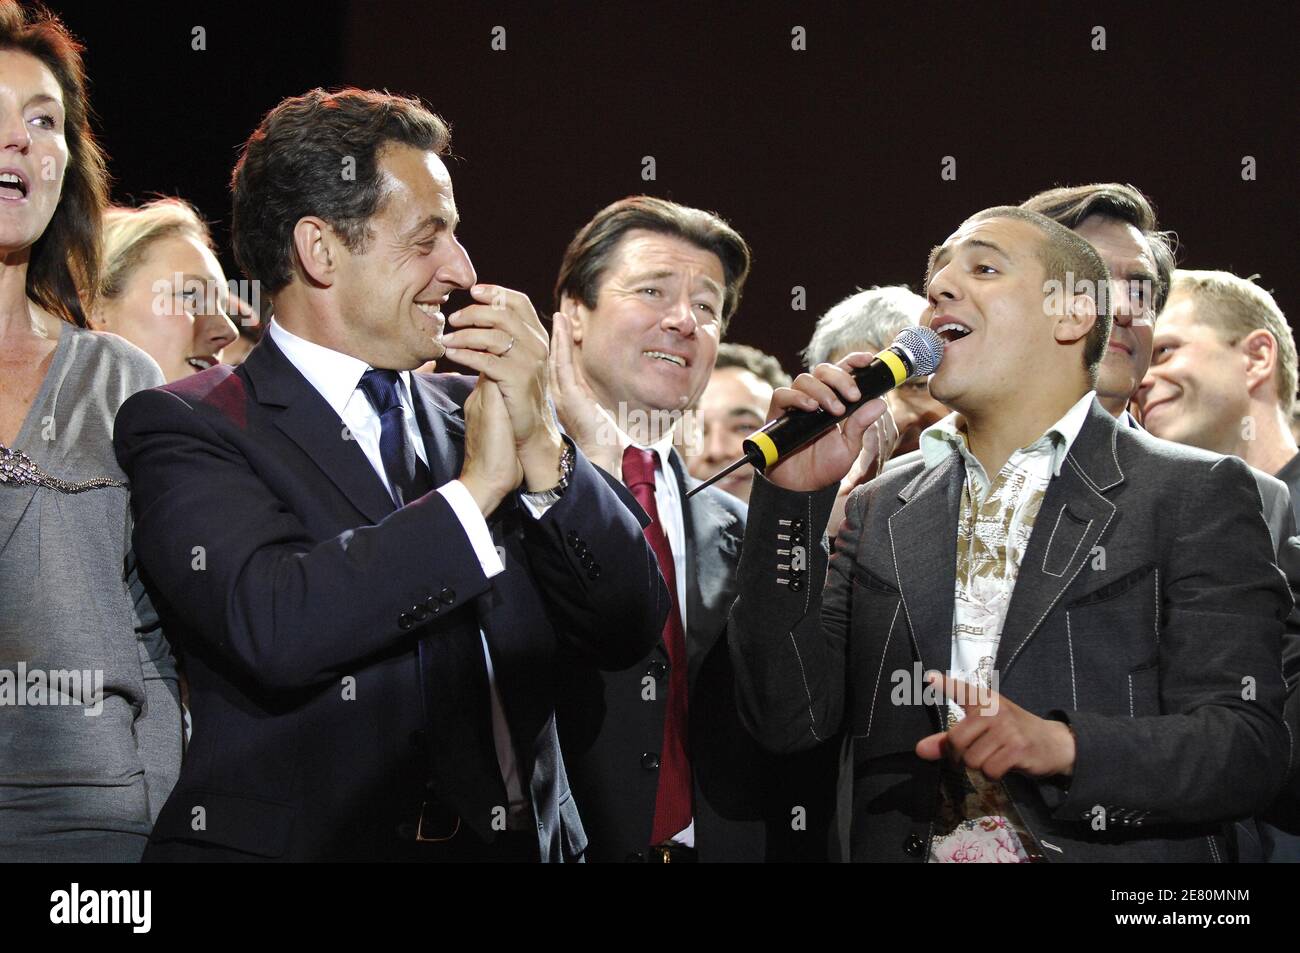 France's newly-elected president Nicolas Sarkozy addresses his supporters alongside his wife Cecilia and singer Faudel, Place de la Concorde in Paris, France, May 6, 2007. French voters elected reform-minded Nicolas Sarkozy as their new president on Sunday, giving him a comfortable winning margin, preliminary official results and projections from four polling agencies showed. With more than half of the vote counted, Sarkozy was scoring just over 53 percent to a little more than 46 percent for Socialist Segolene Royal. Polling agencies also had the conservative Sarkozy winning 53 percent of the Stock Photo